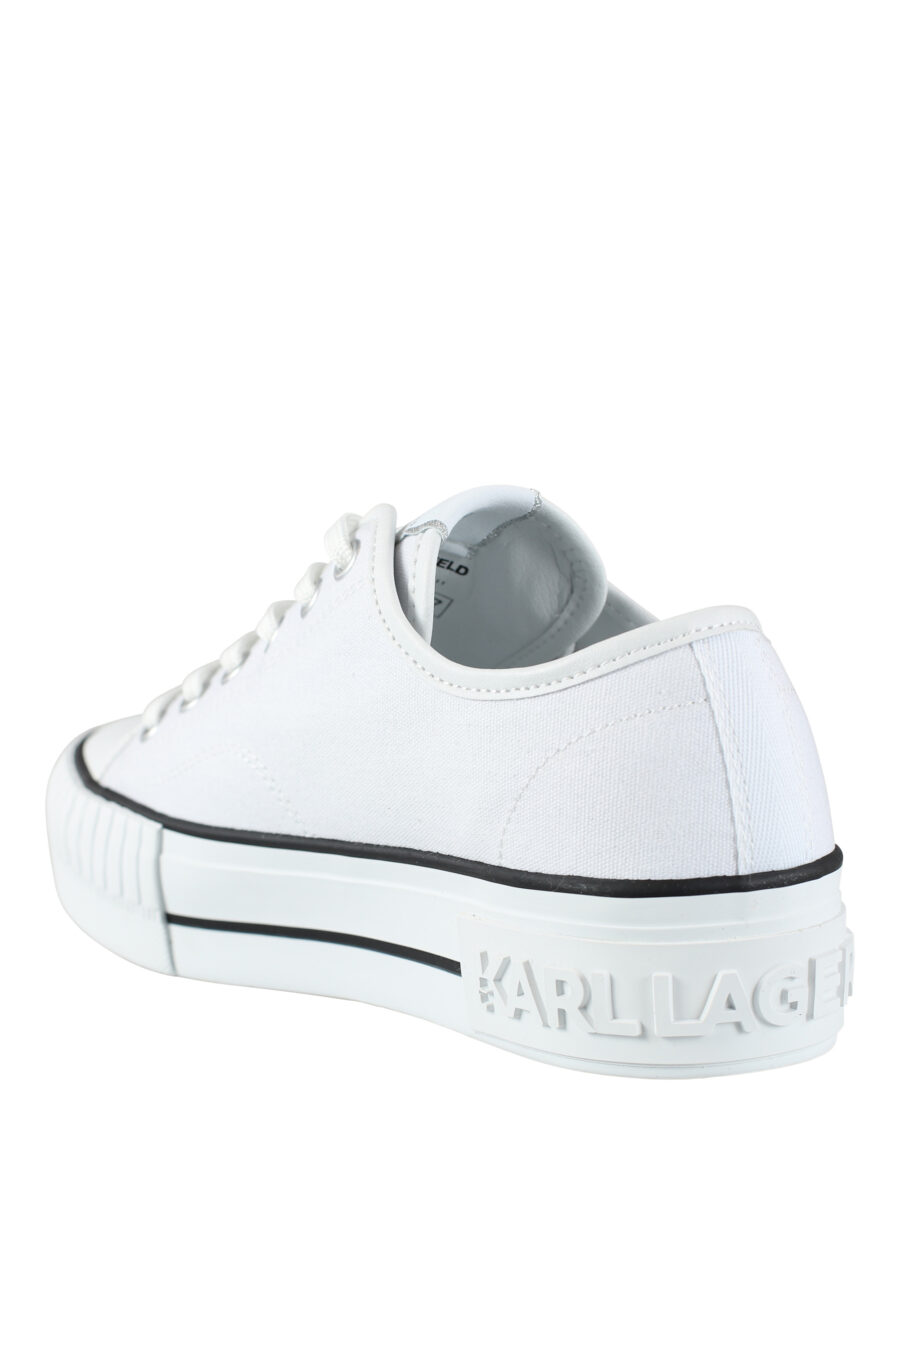 White converse style trainers with rubber "karl" logo - IMG 9564